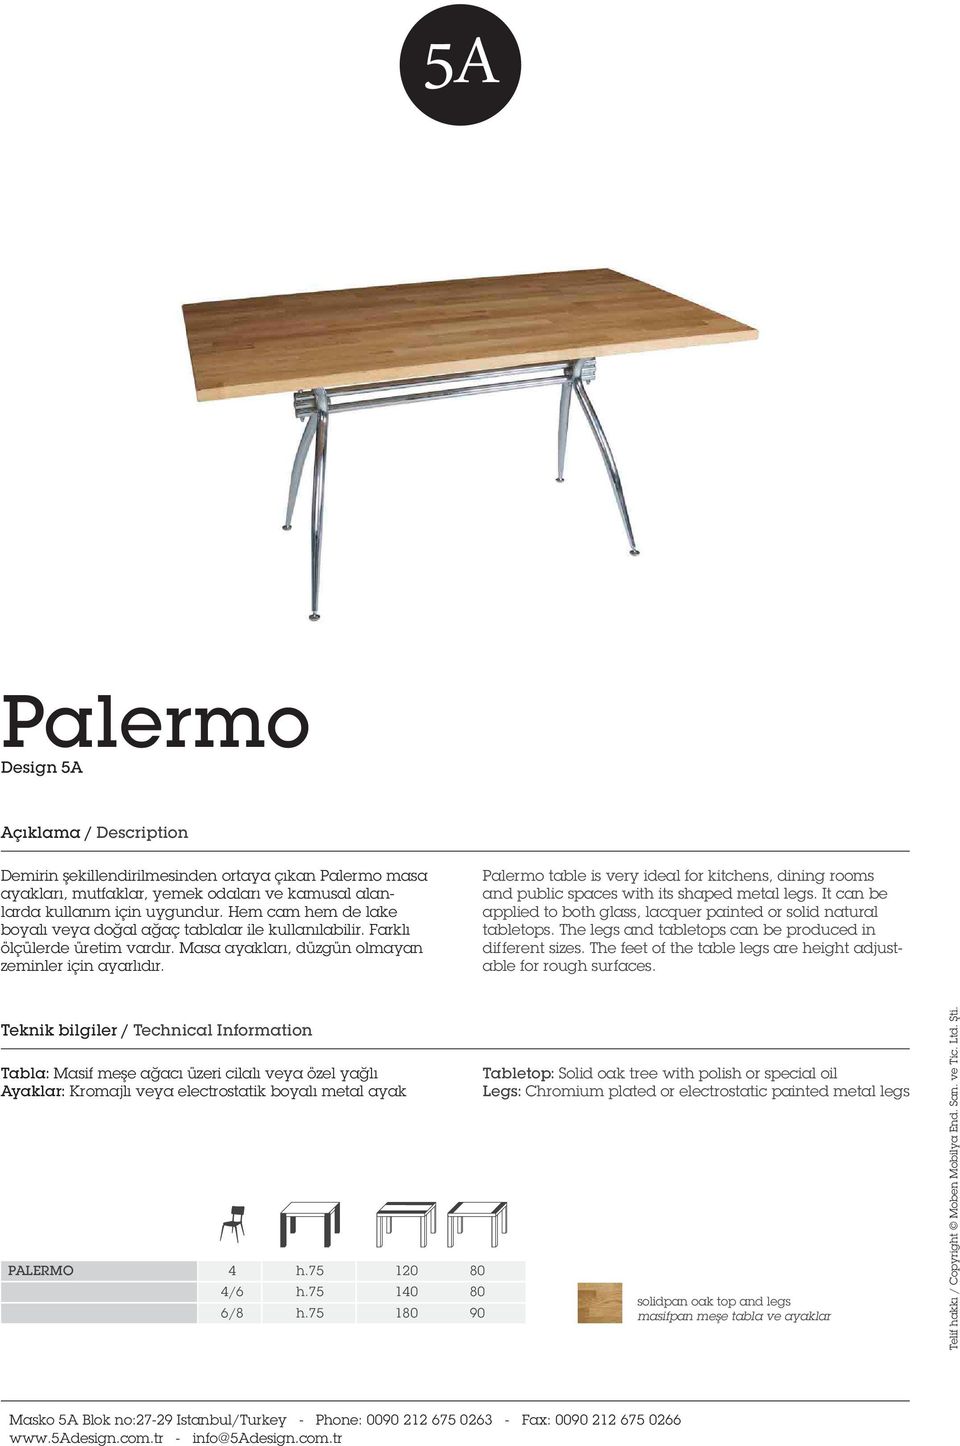 Palermo table is very ideal for kitchens, dining rooms and public spaces with its shaped metal legs. It can be applied to both glass, lacquer painted or solid natural tabletops.